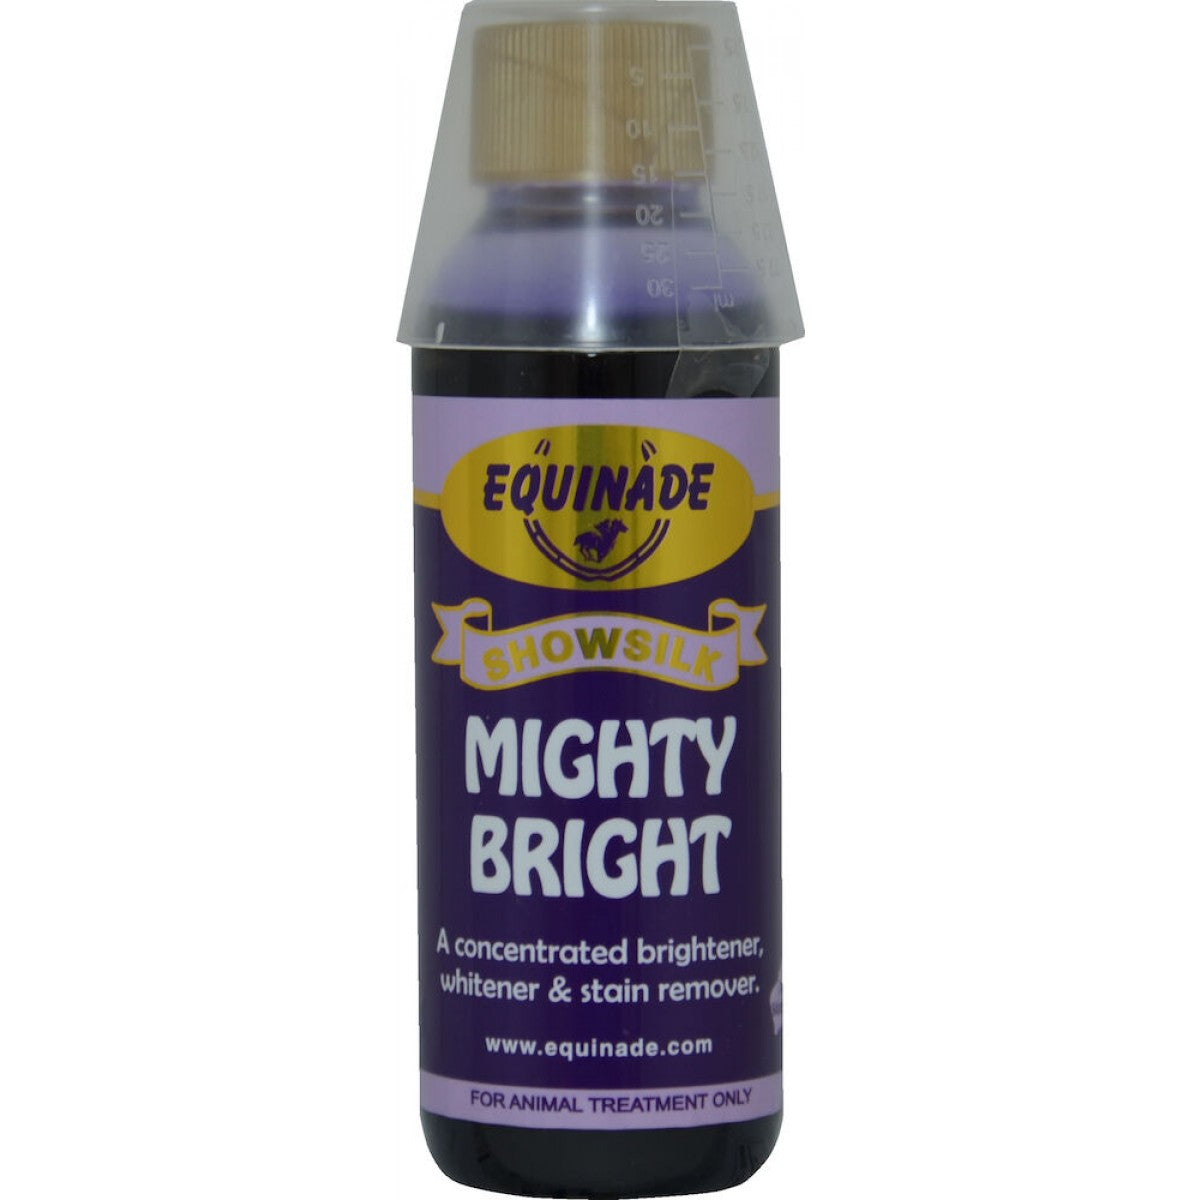 Equinade Mighty Bright Stain Remover